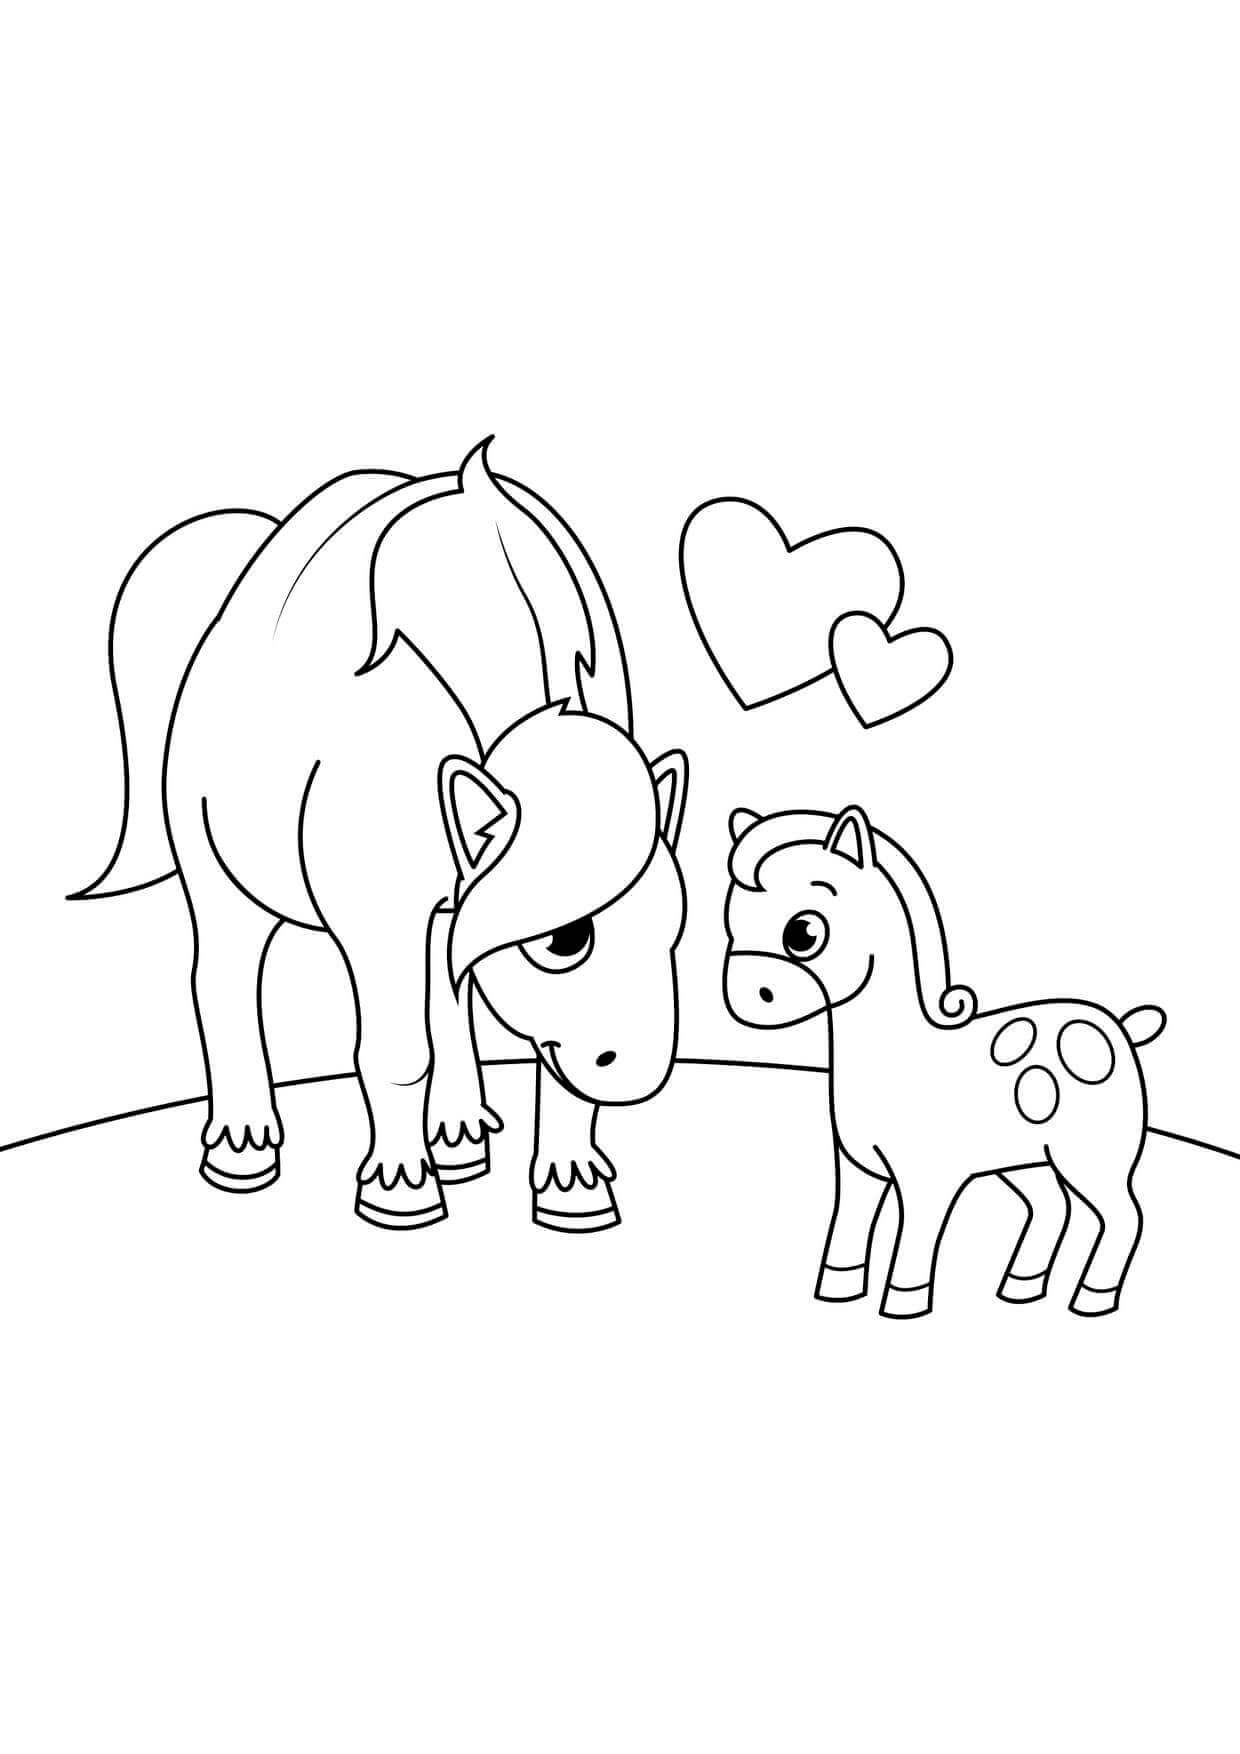 Coloring Pages For Girls To Print